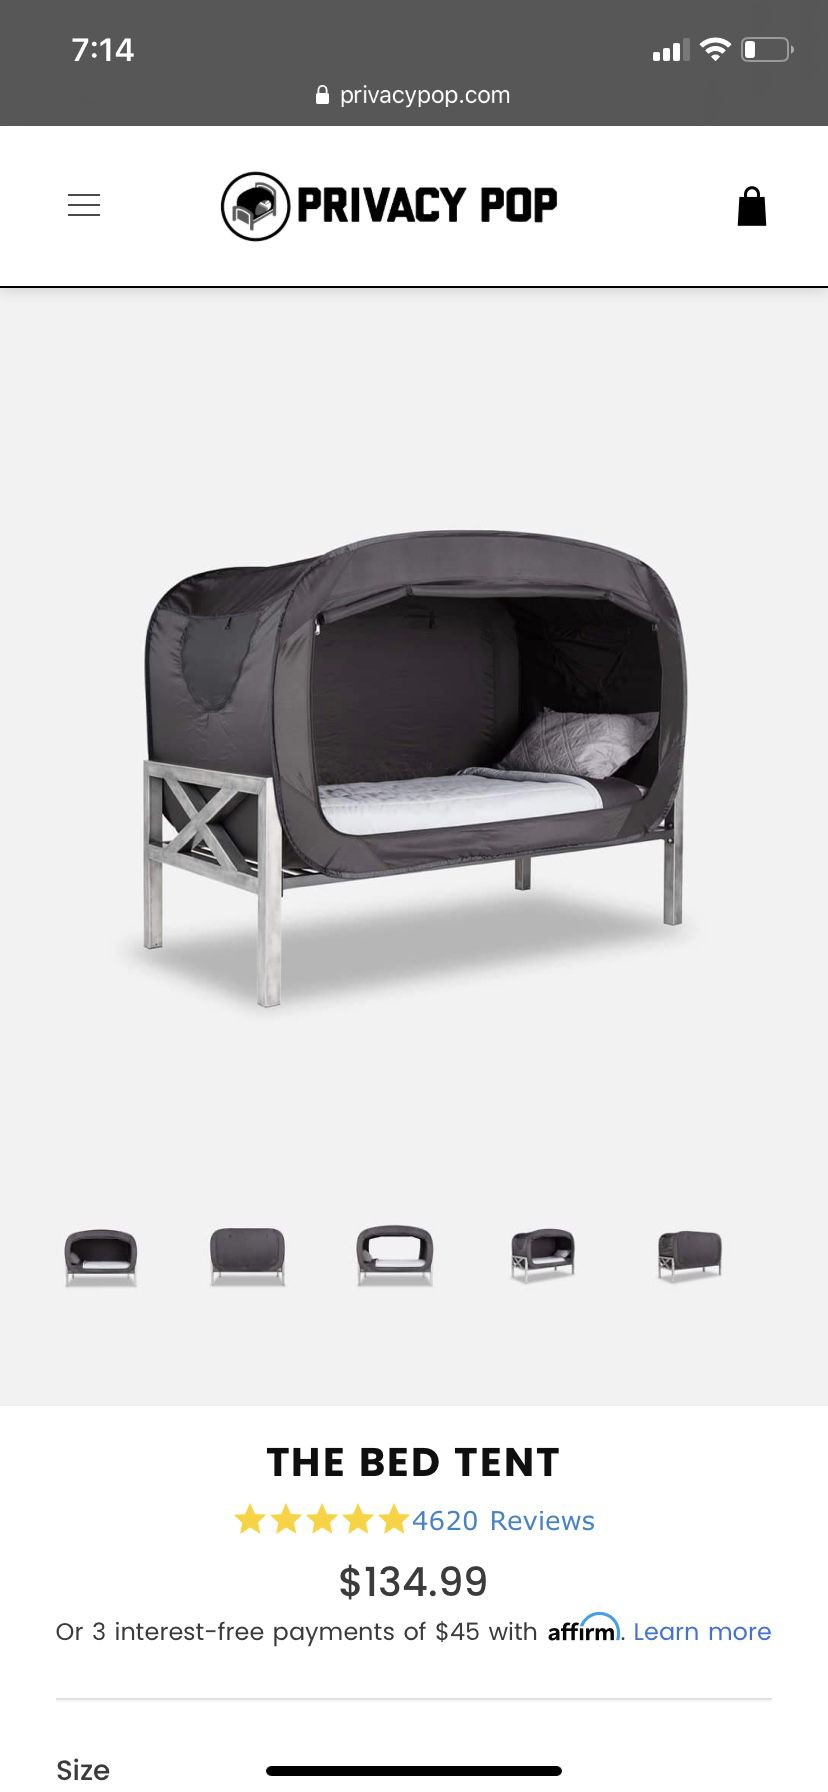 Privacy pop bed tent size queen